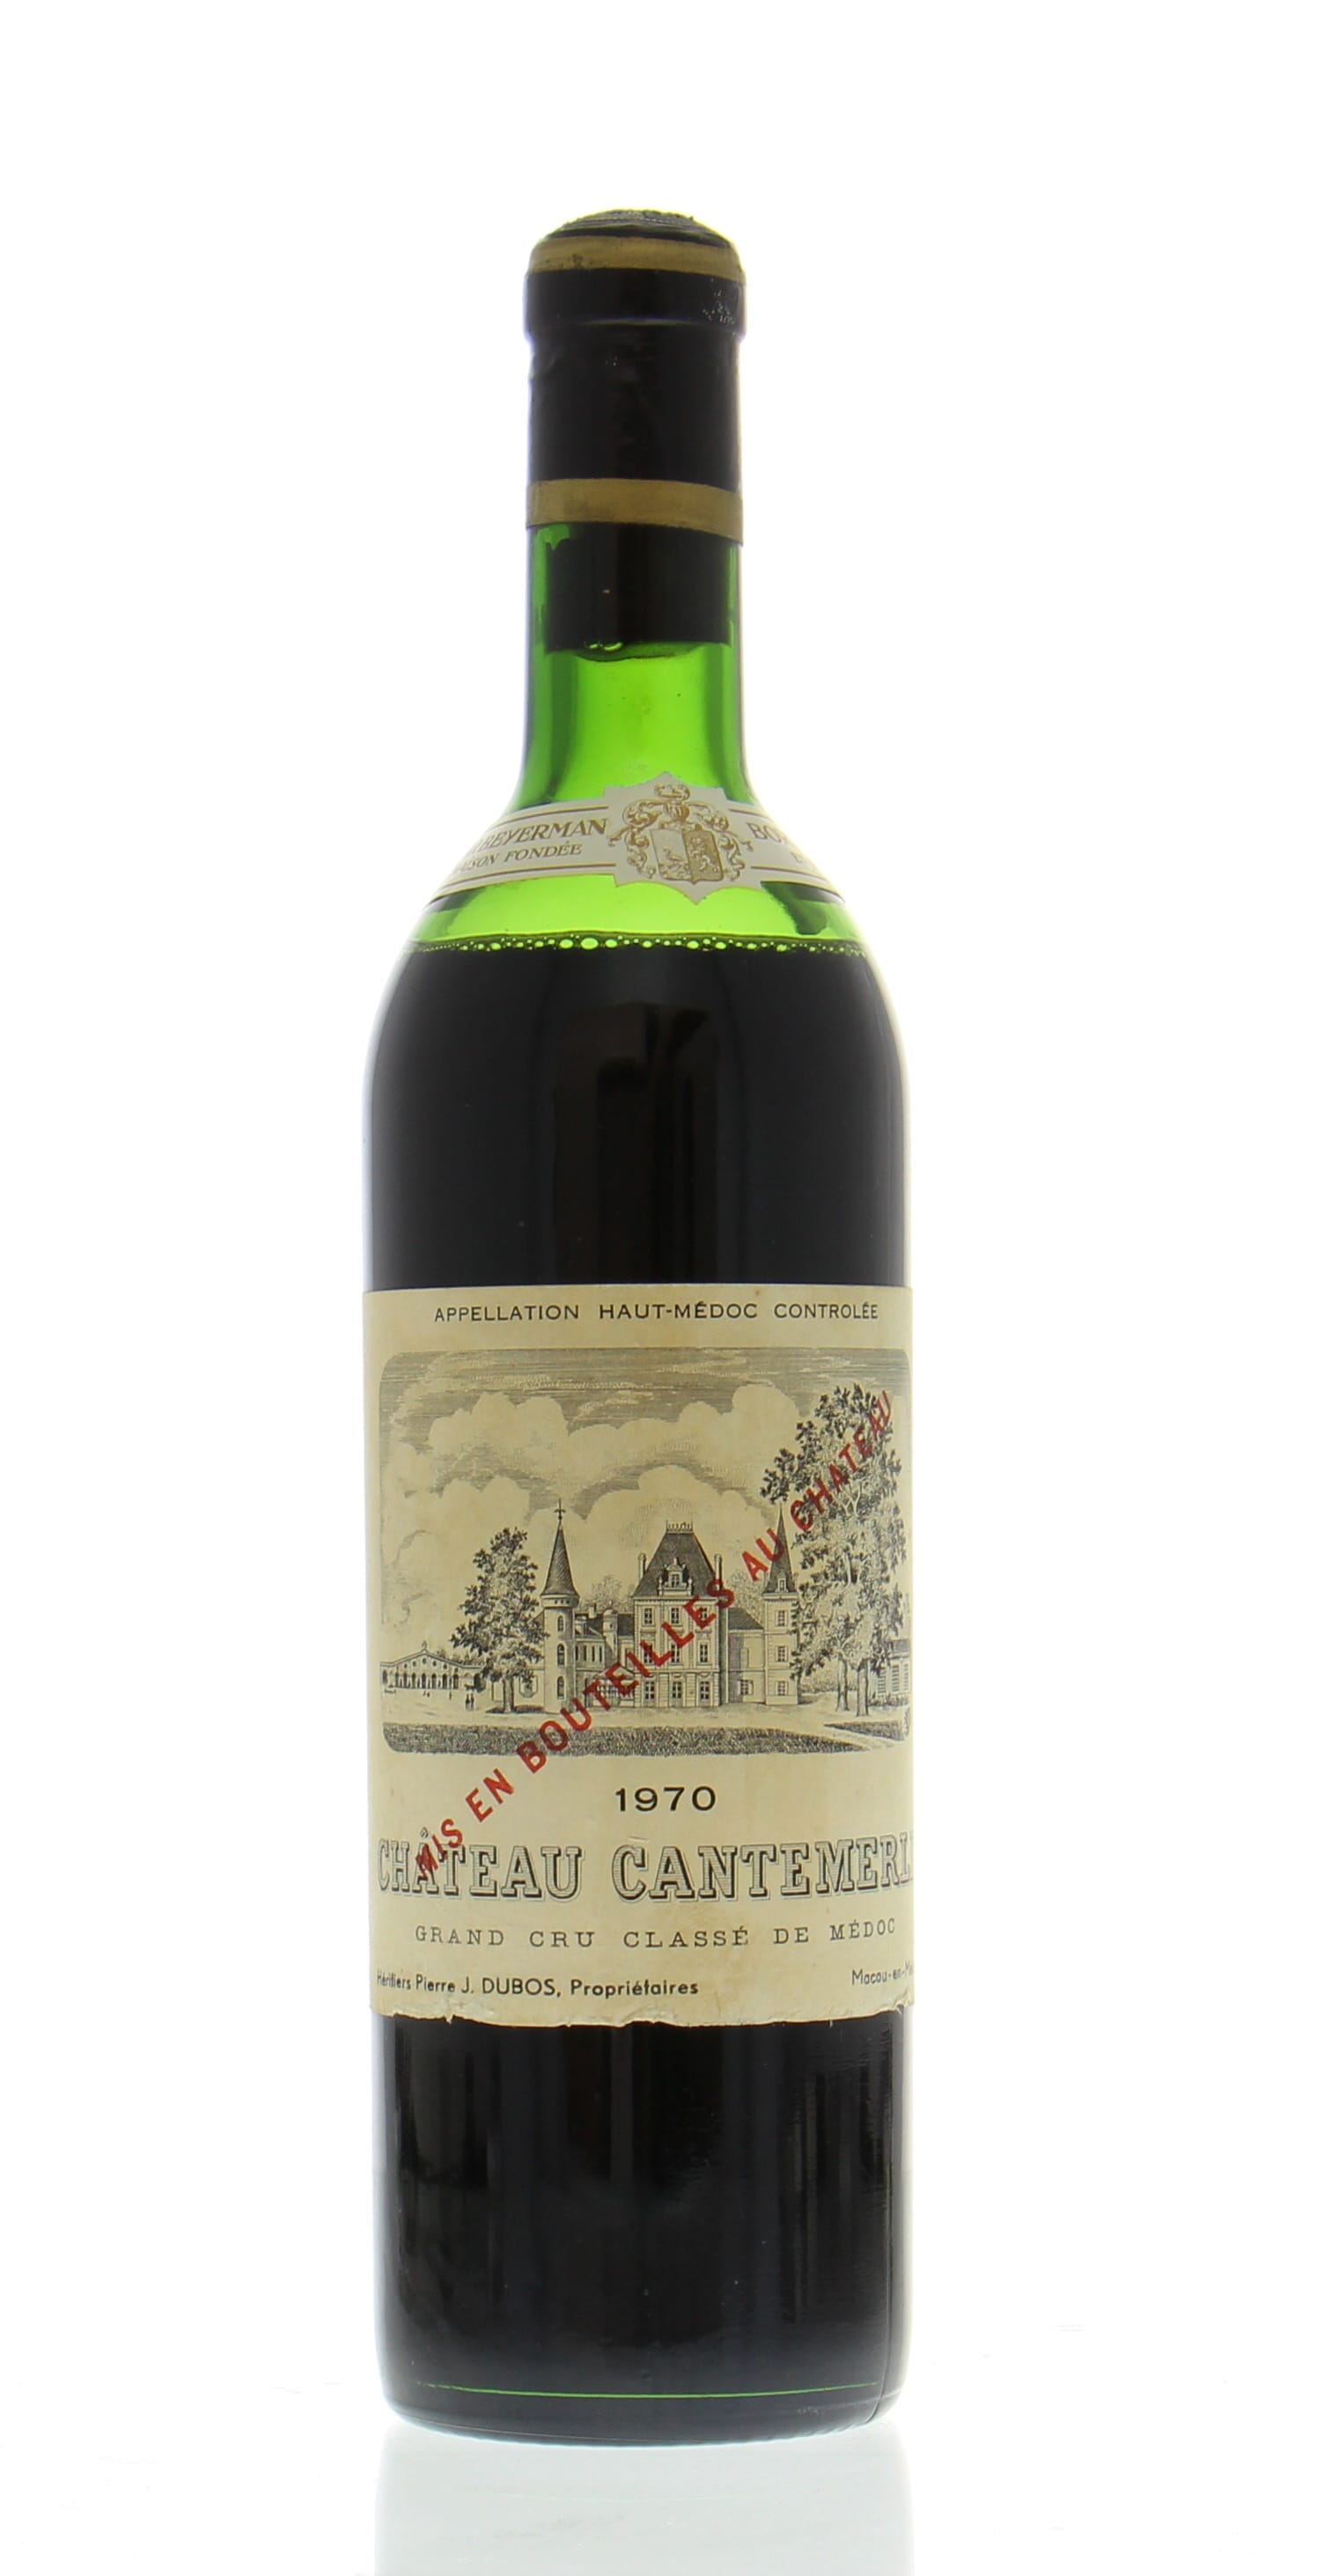 Chateau Cantemerle - Chateau Cantemerle 1970 Mid to High shoulder